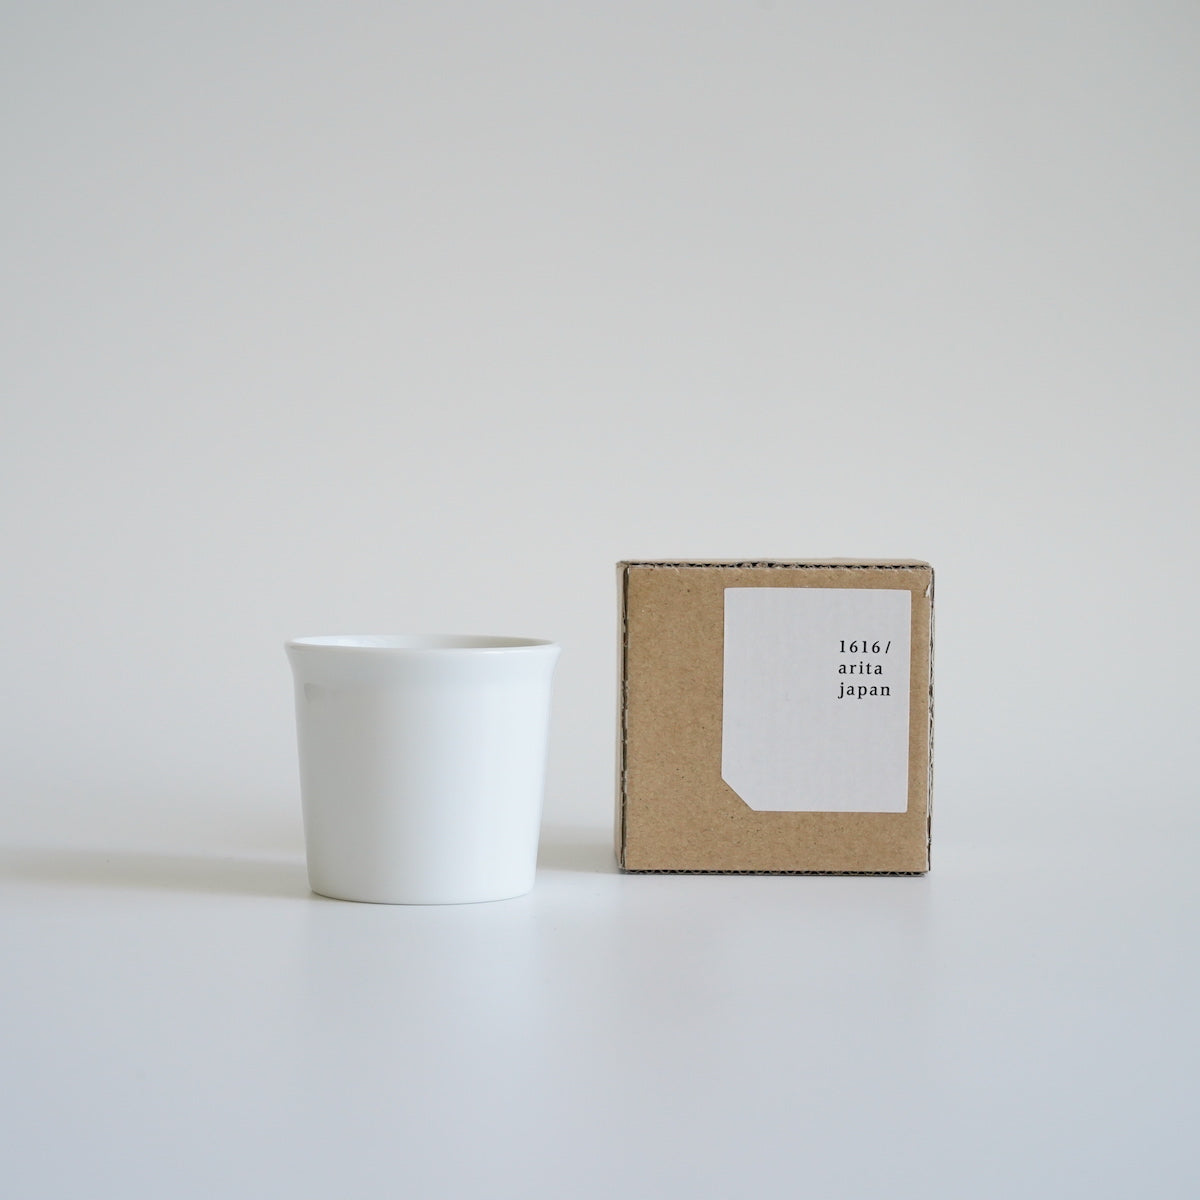 1616/arita japan TY "Standard" Espresso Cup White with packaging